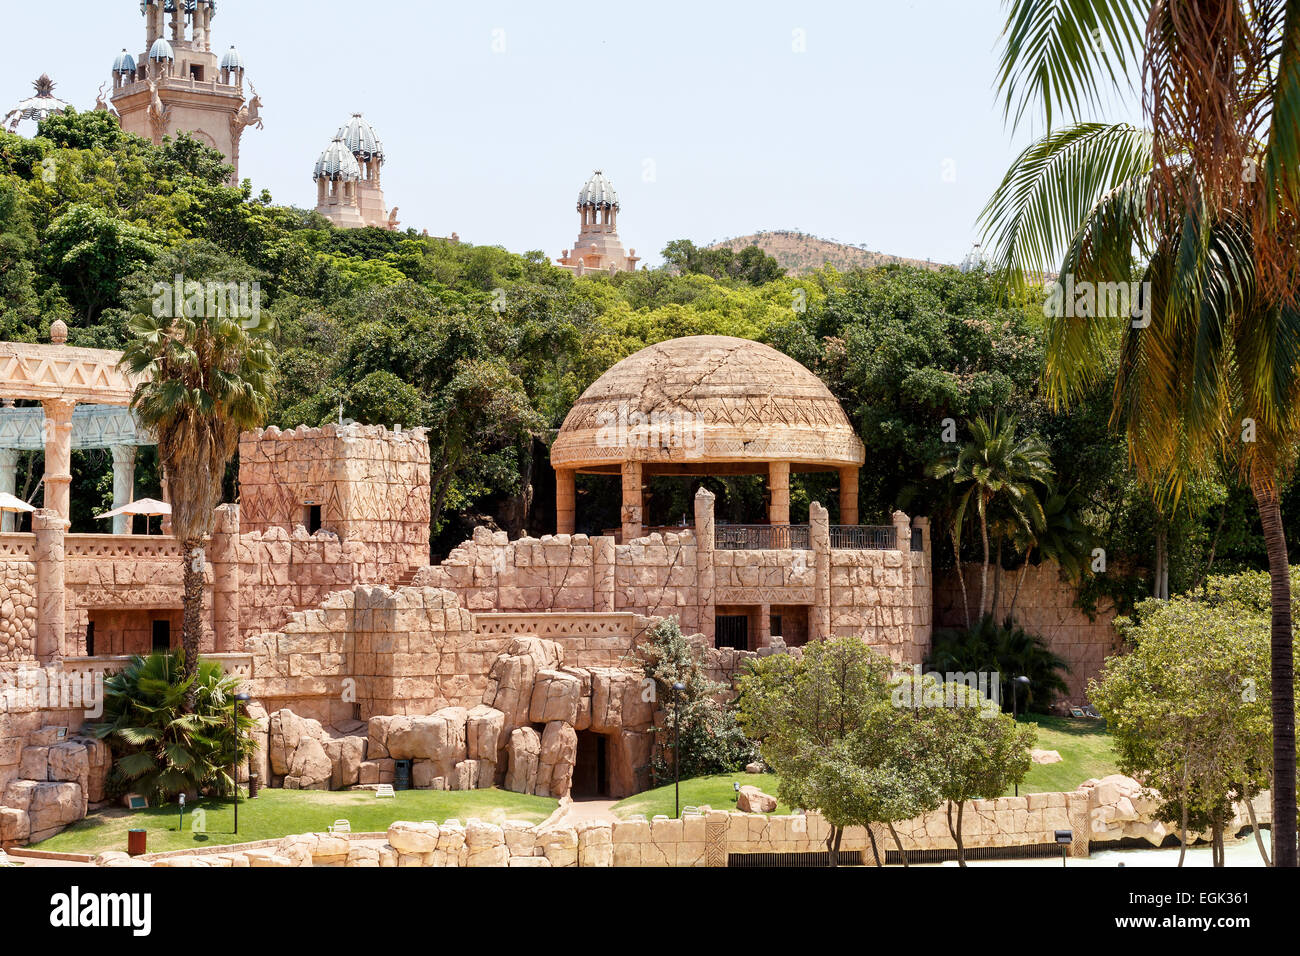 Sun City, The Palace of Lost City, Luxury Resort in South Africa Stock Photo